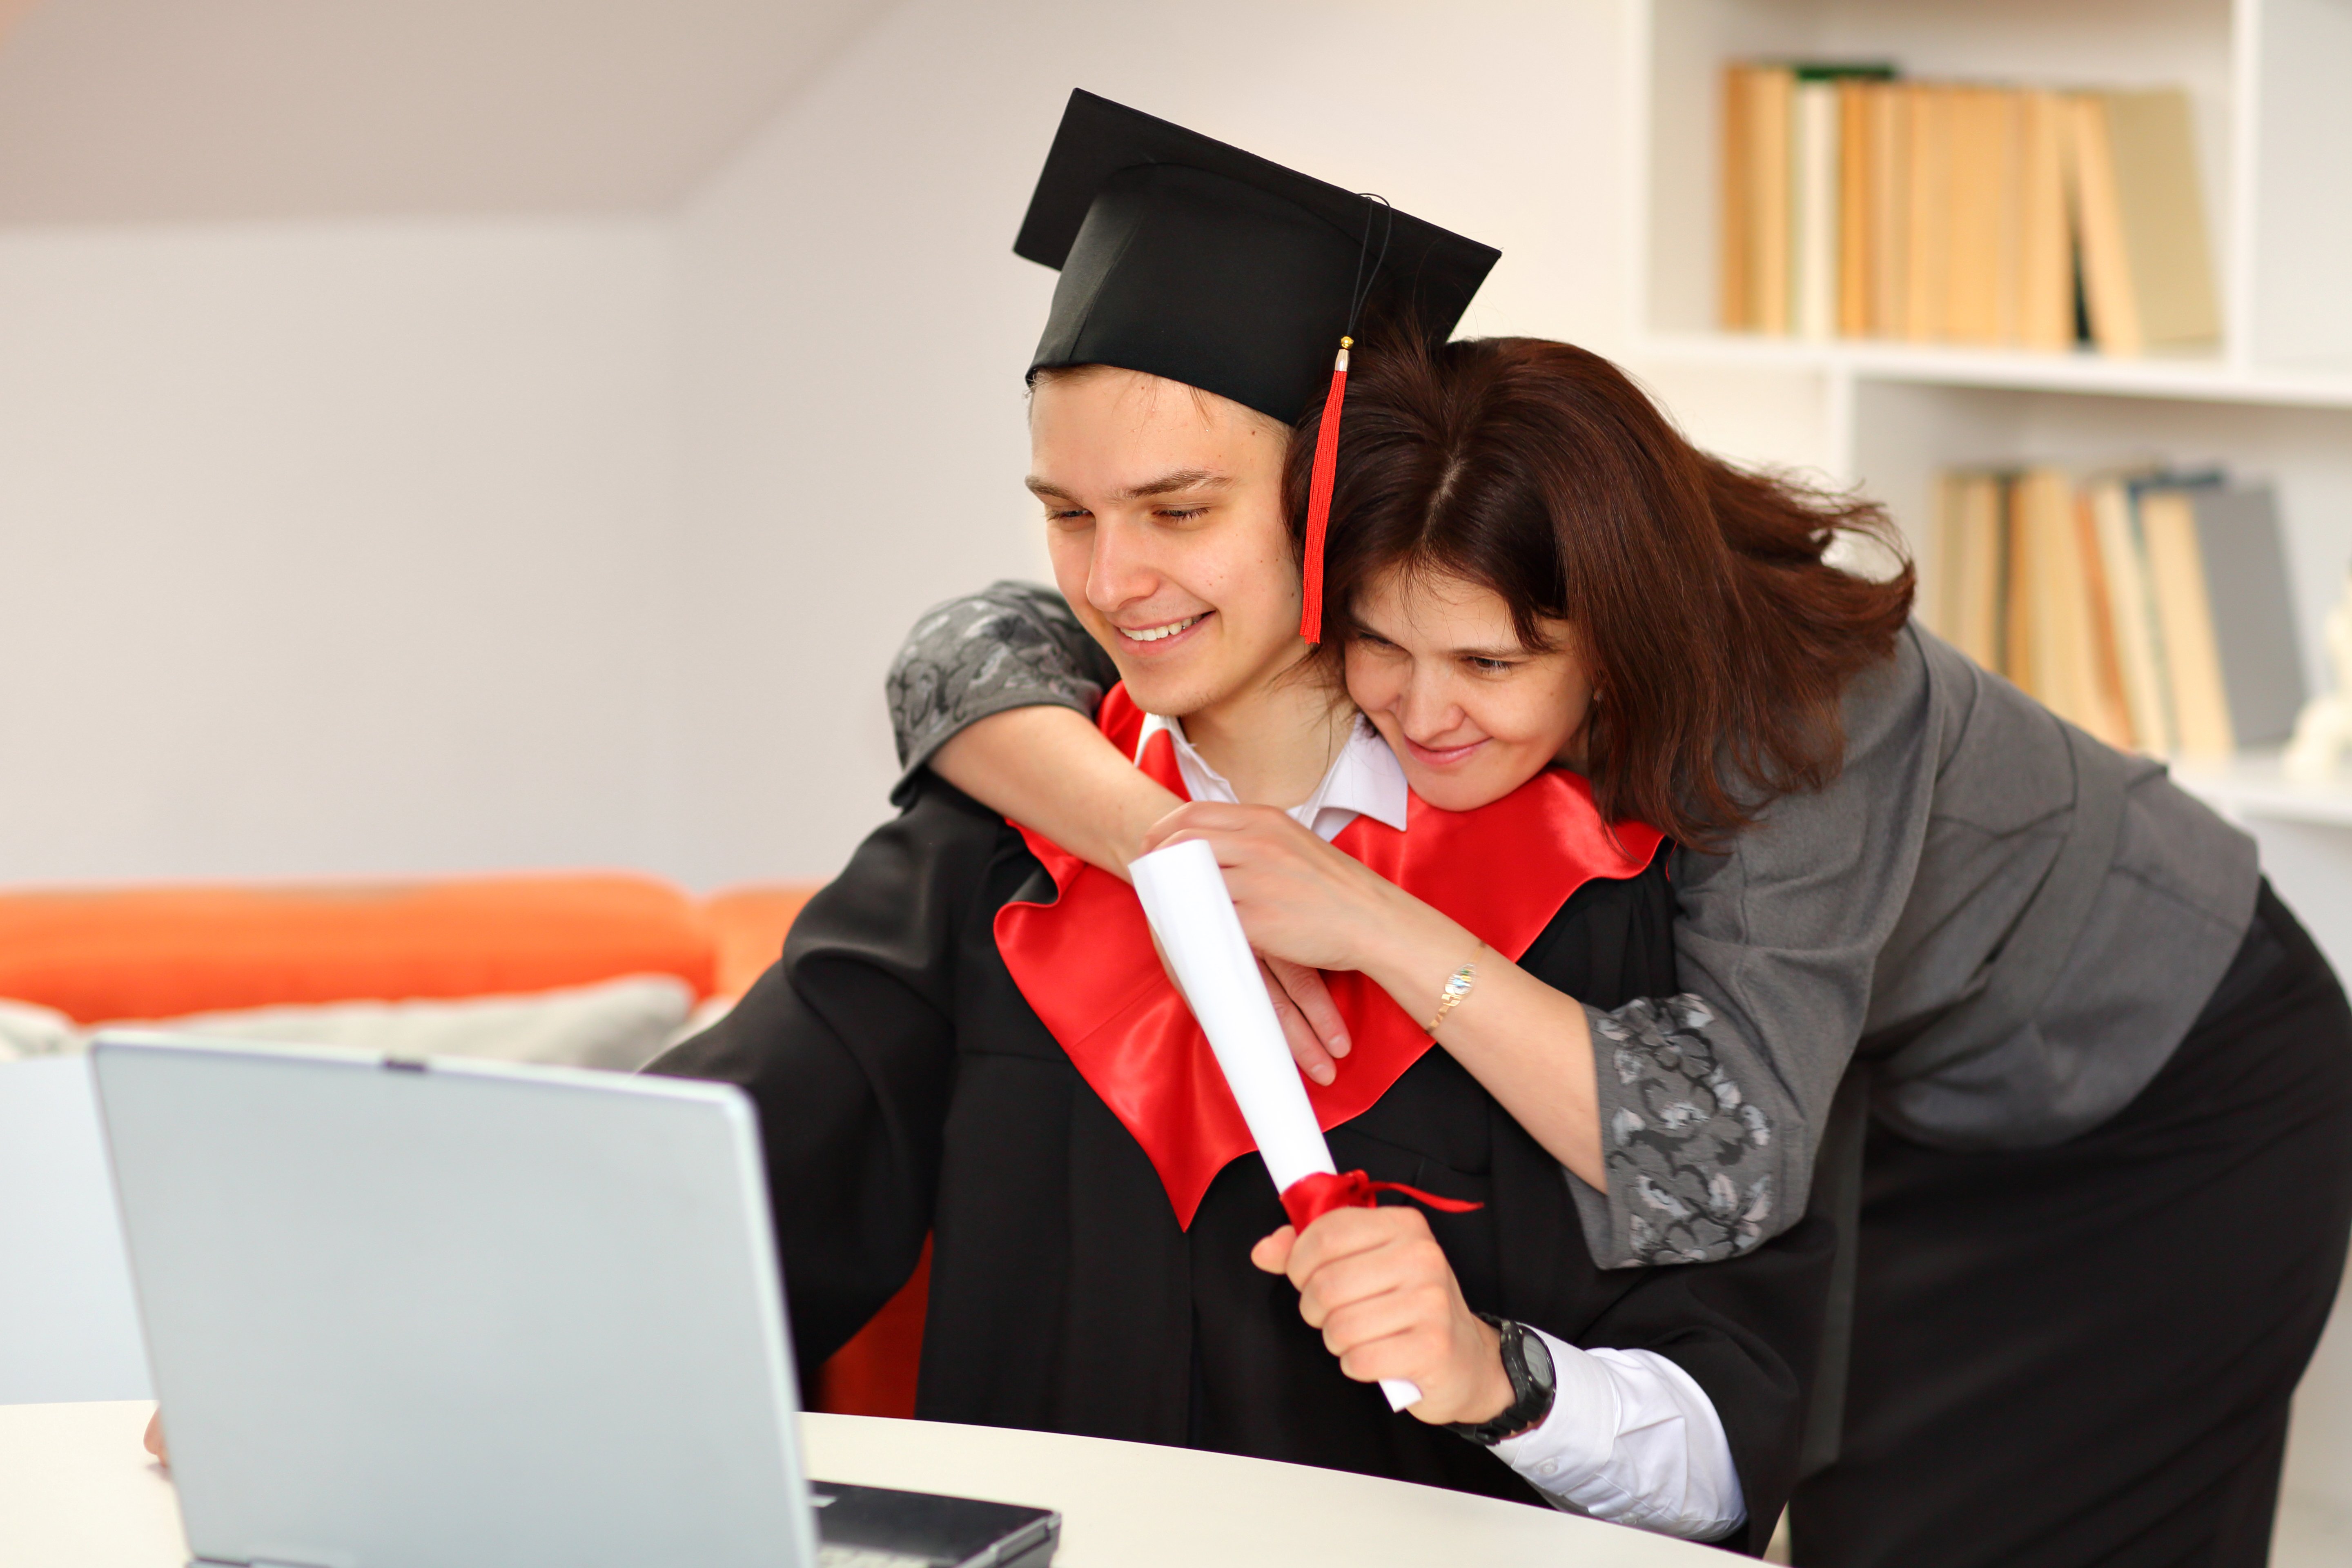 mother-hugs-her-son-student-graduation-gown-graduate-cap-holds-scroll-his-hand-watches-broadcast-graduation-ceremony-while-home